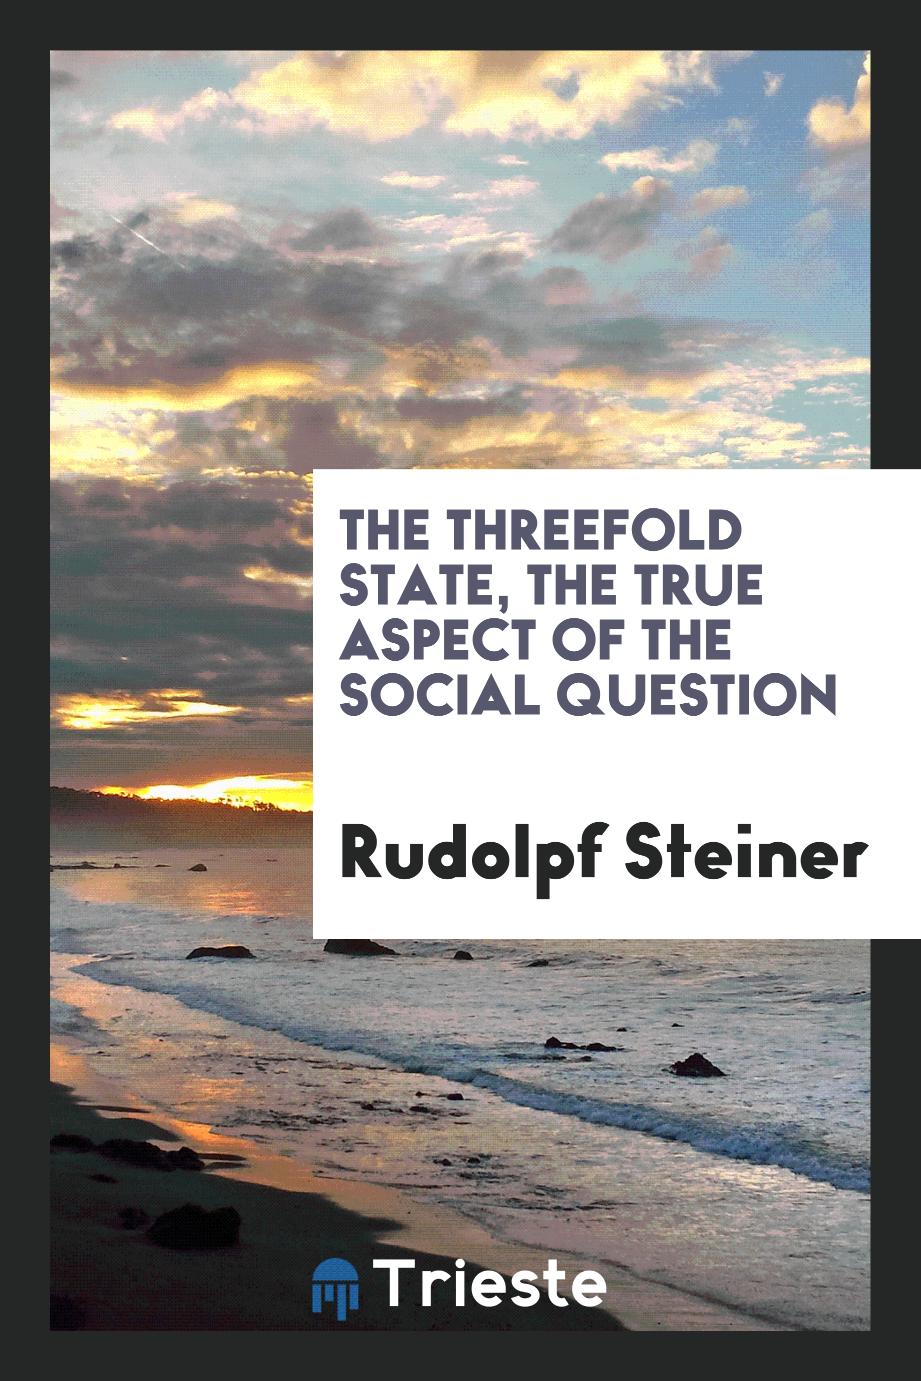 The threefold state, the true aspect of the social question